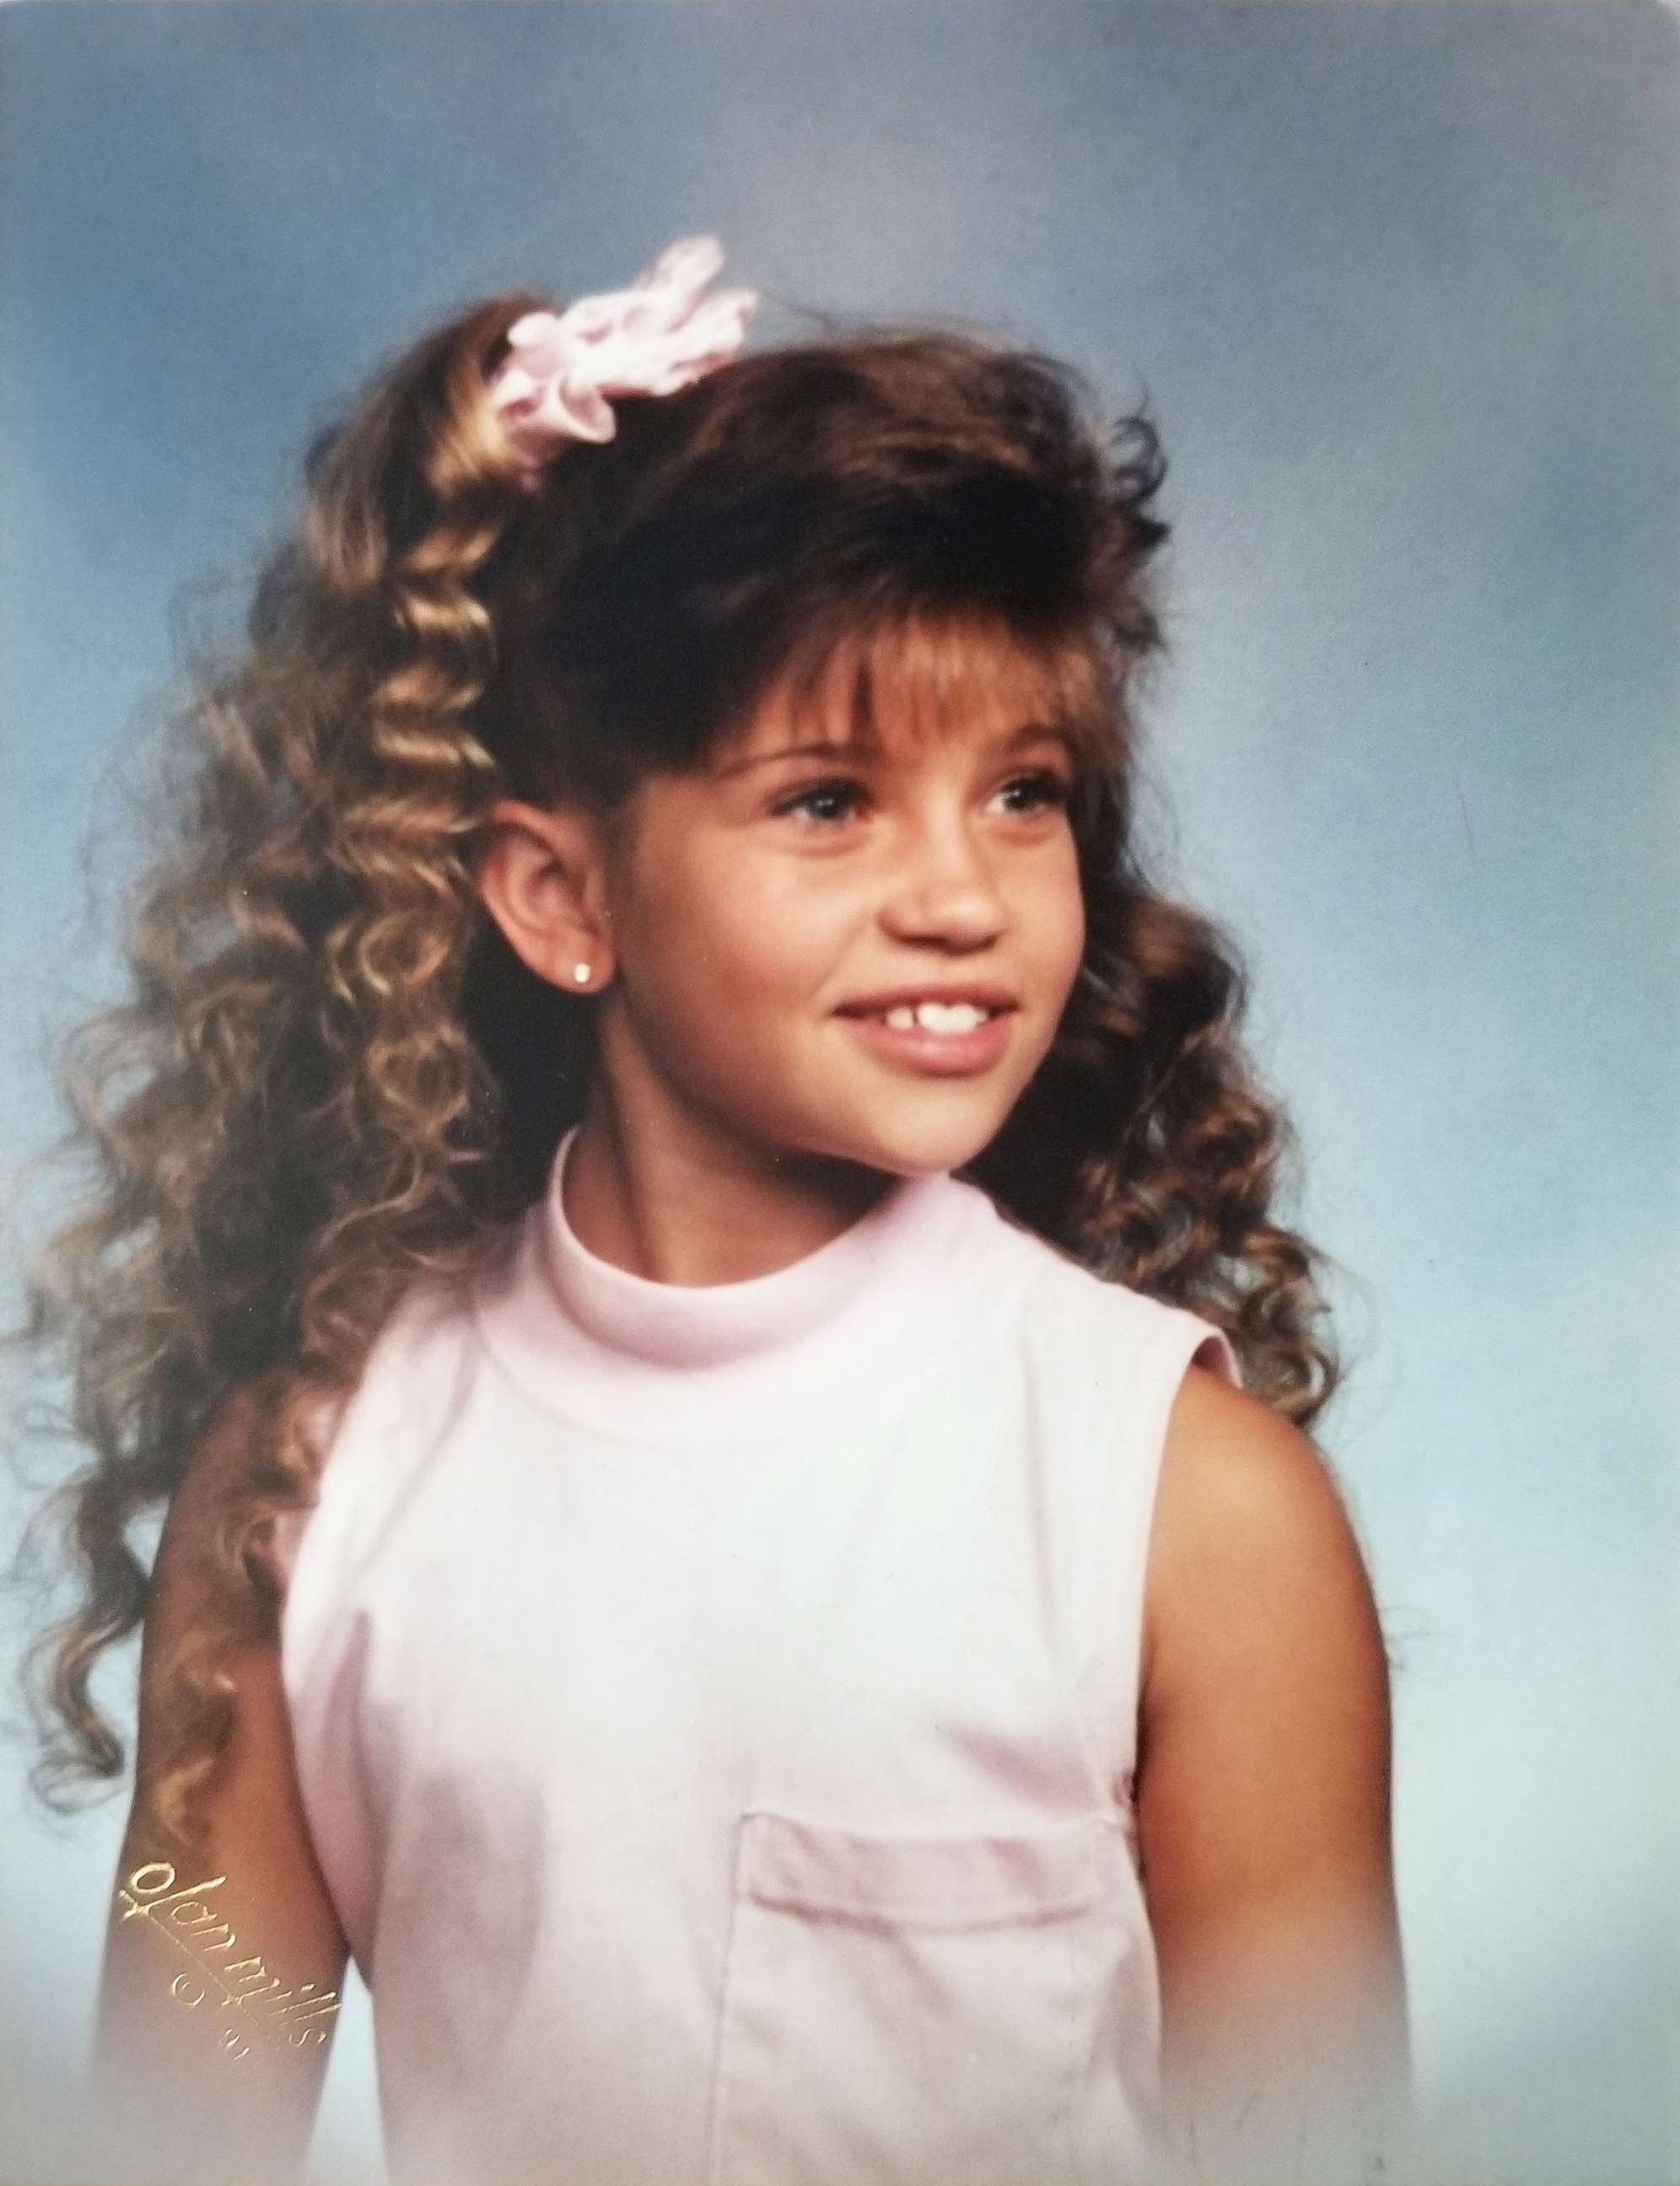 PHOTO: Danielle Fishel discovered her passion for performing in elementary school, when this photo was taken.